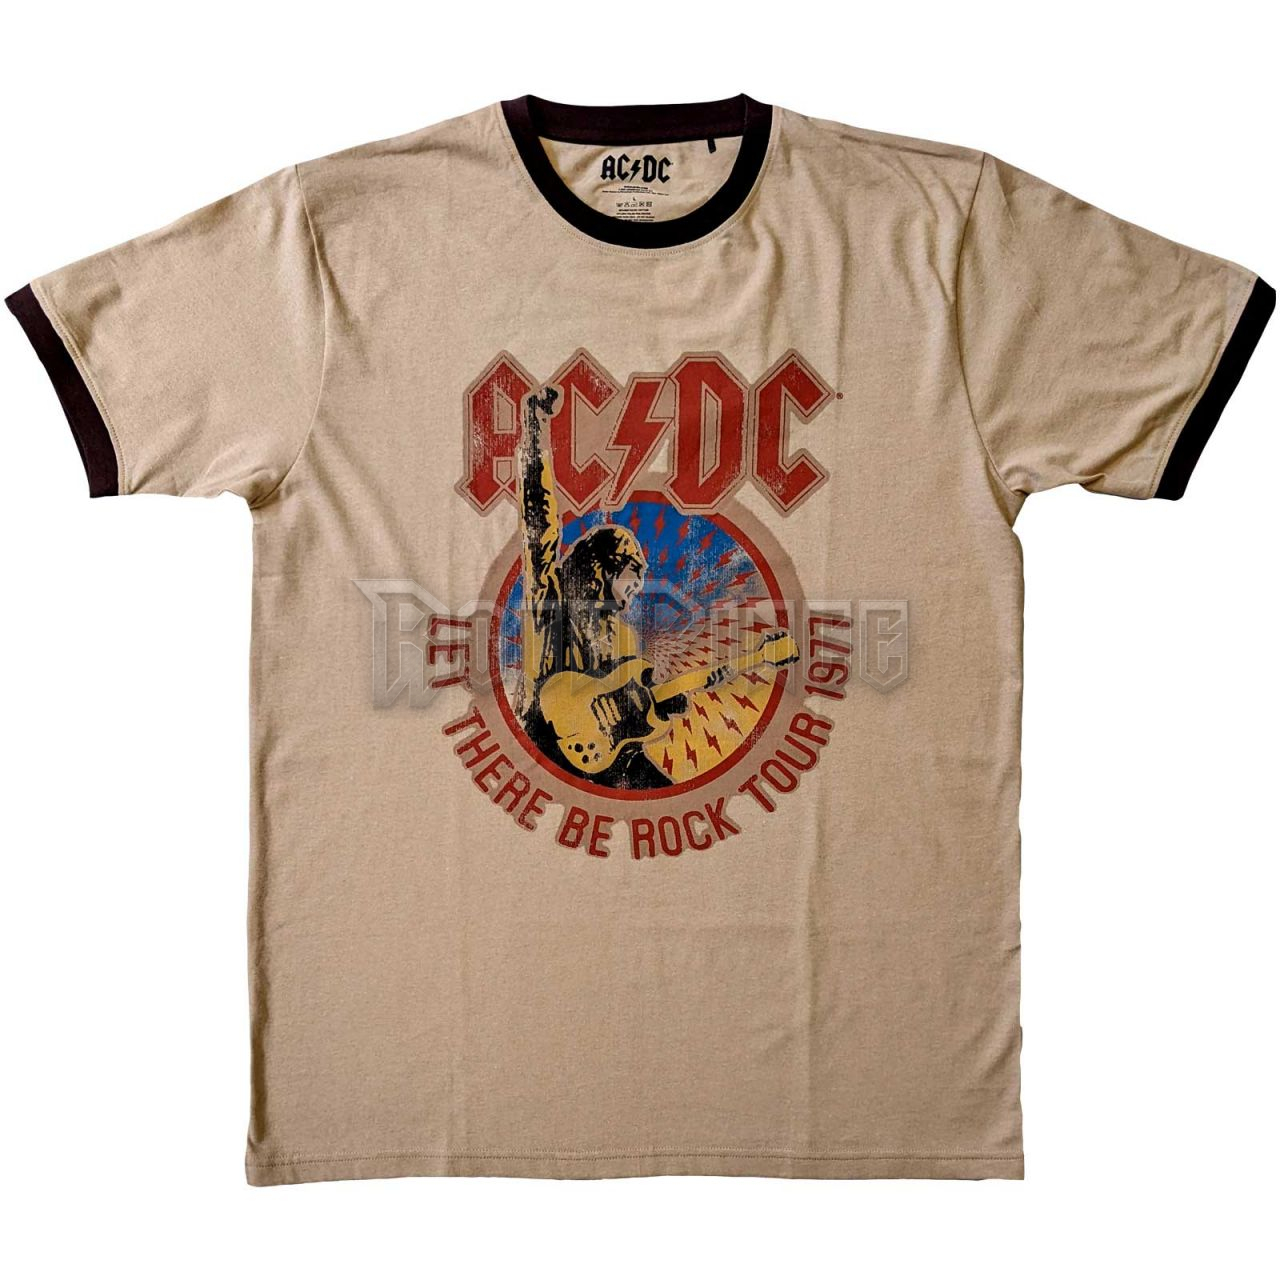 AC/DC - Let There Be Rock Tour '77 - unisex póló - ACDCTS101MS